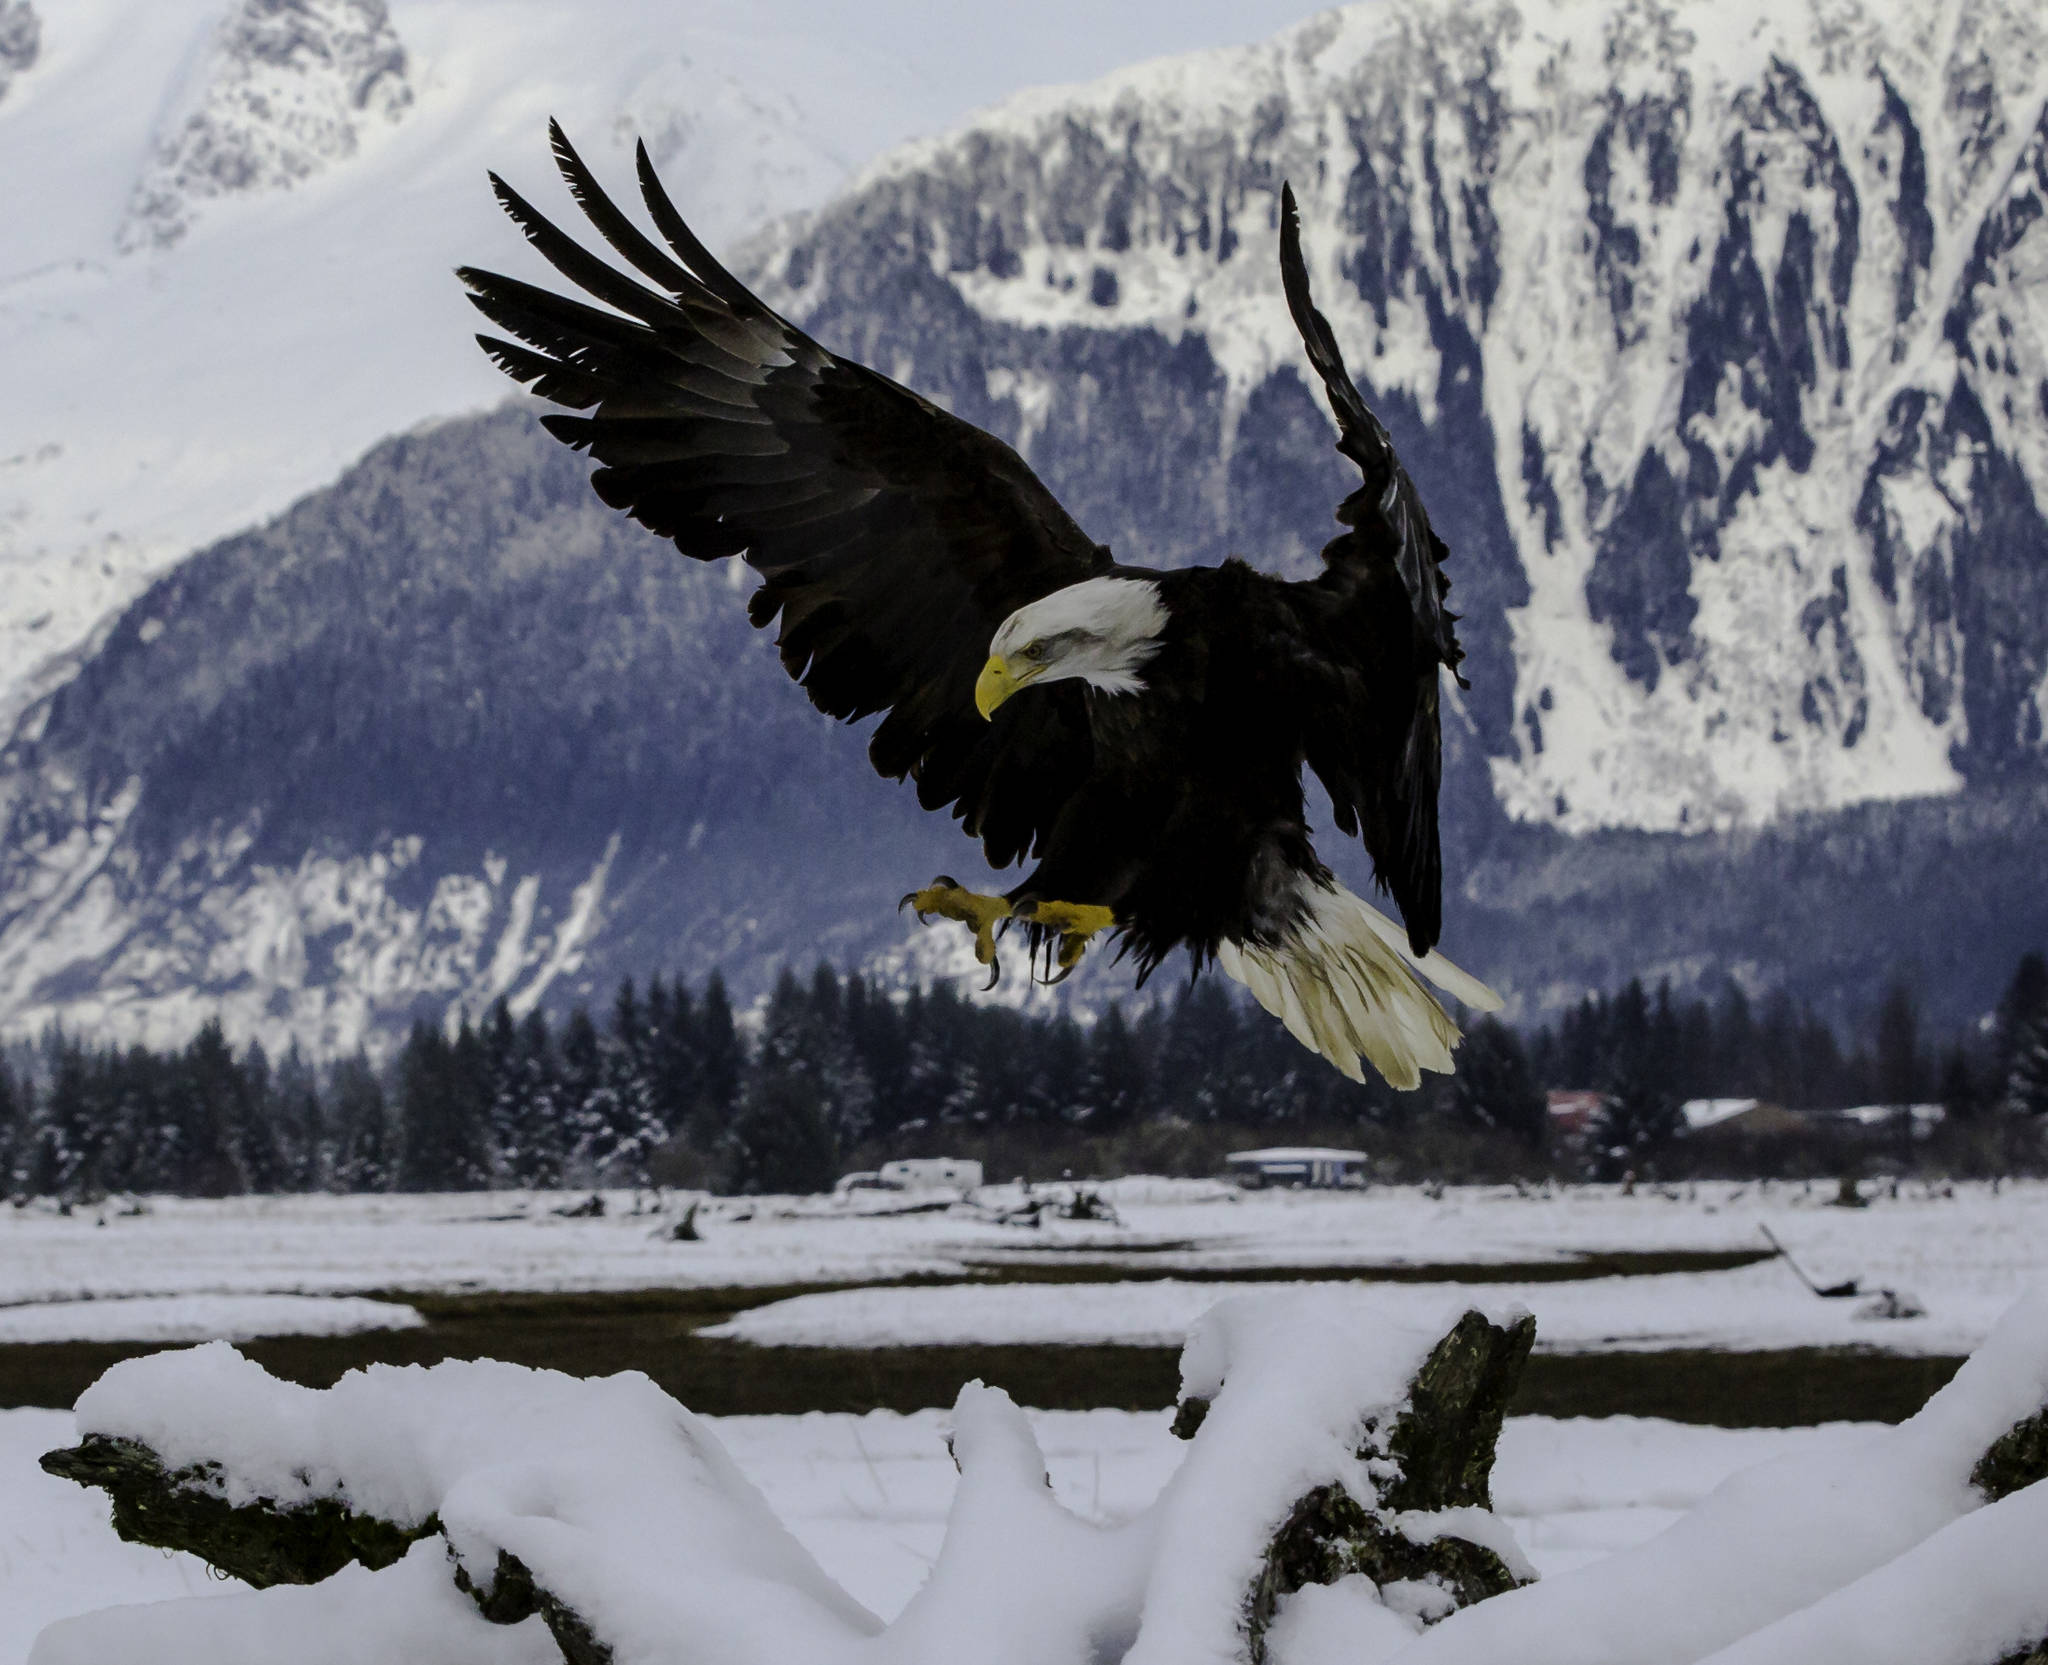 This photo shows a bald eagle on Jan. 3 at the Mendenhall Wetlands. (Courtesy Photo / Jack Beedle)